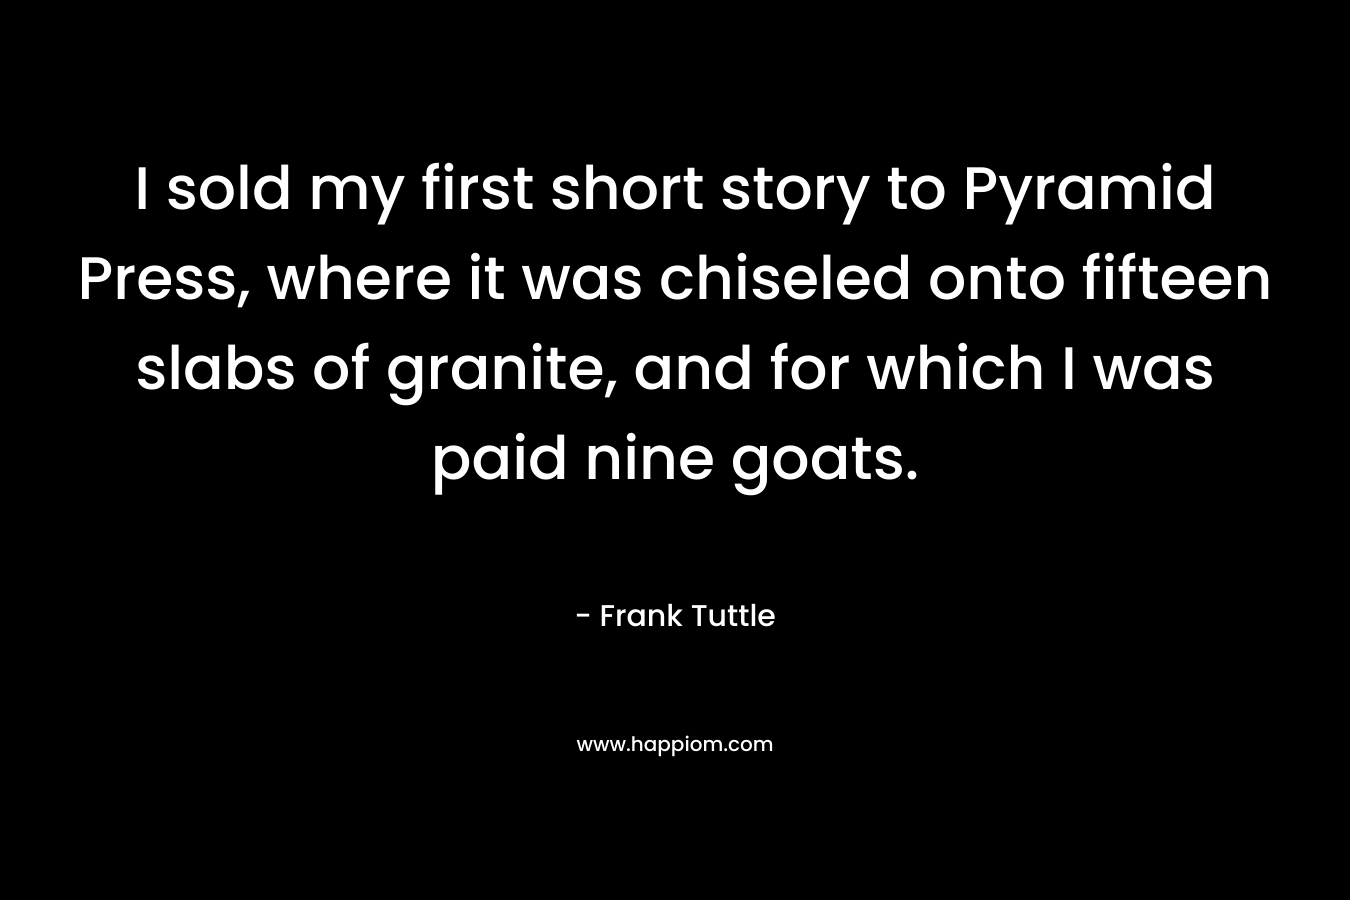 I sold my first short story to Pyramid Press, where it was chiseled onto fifteen slabs of granite, and for which I was paid nine goats. – Frank Tuttle